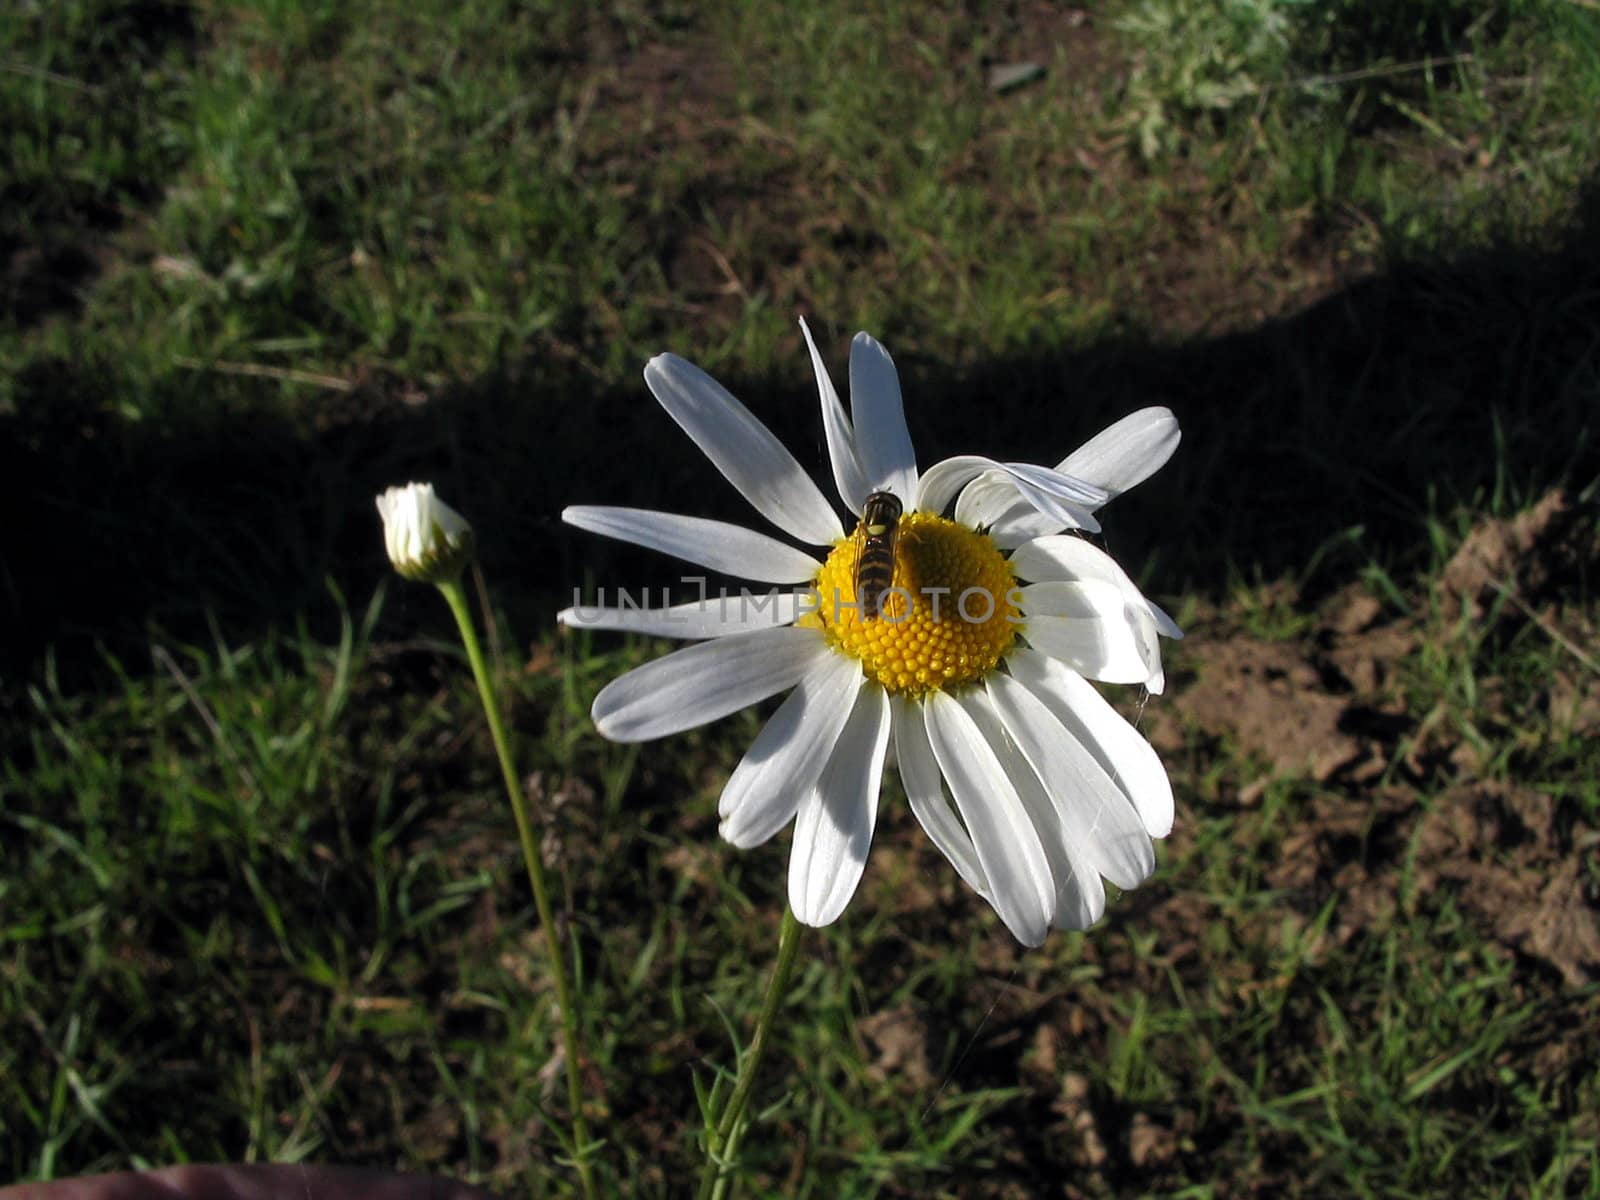 Hoverfly sitting on camomile